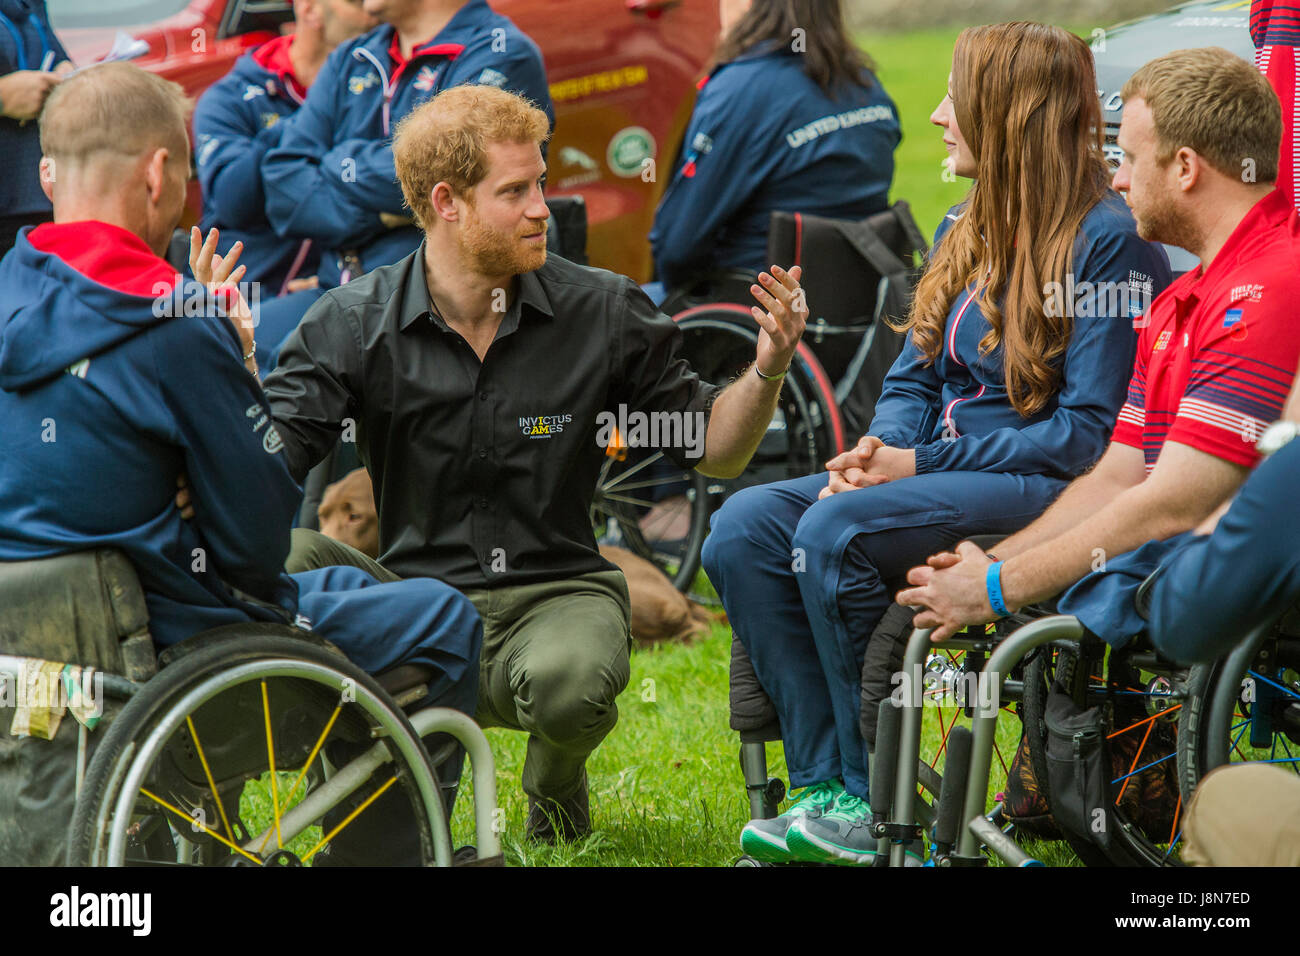 London, UK. 30th May, 2017. Prince Harry talks to wheelchair bound team members as he attends the launch of UK team for the Invictus Games Toronto at Tower of London. The Invictus Games was set up for injured soldiers. London 30 May 2017 Credit: Guy Bell/Alamy Live News Stock Photo